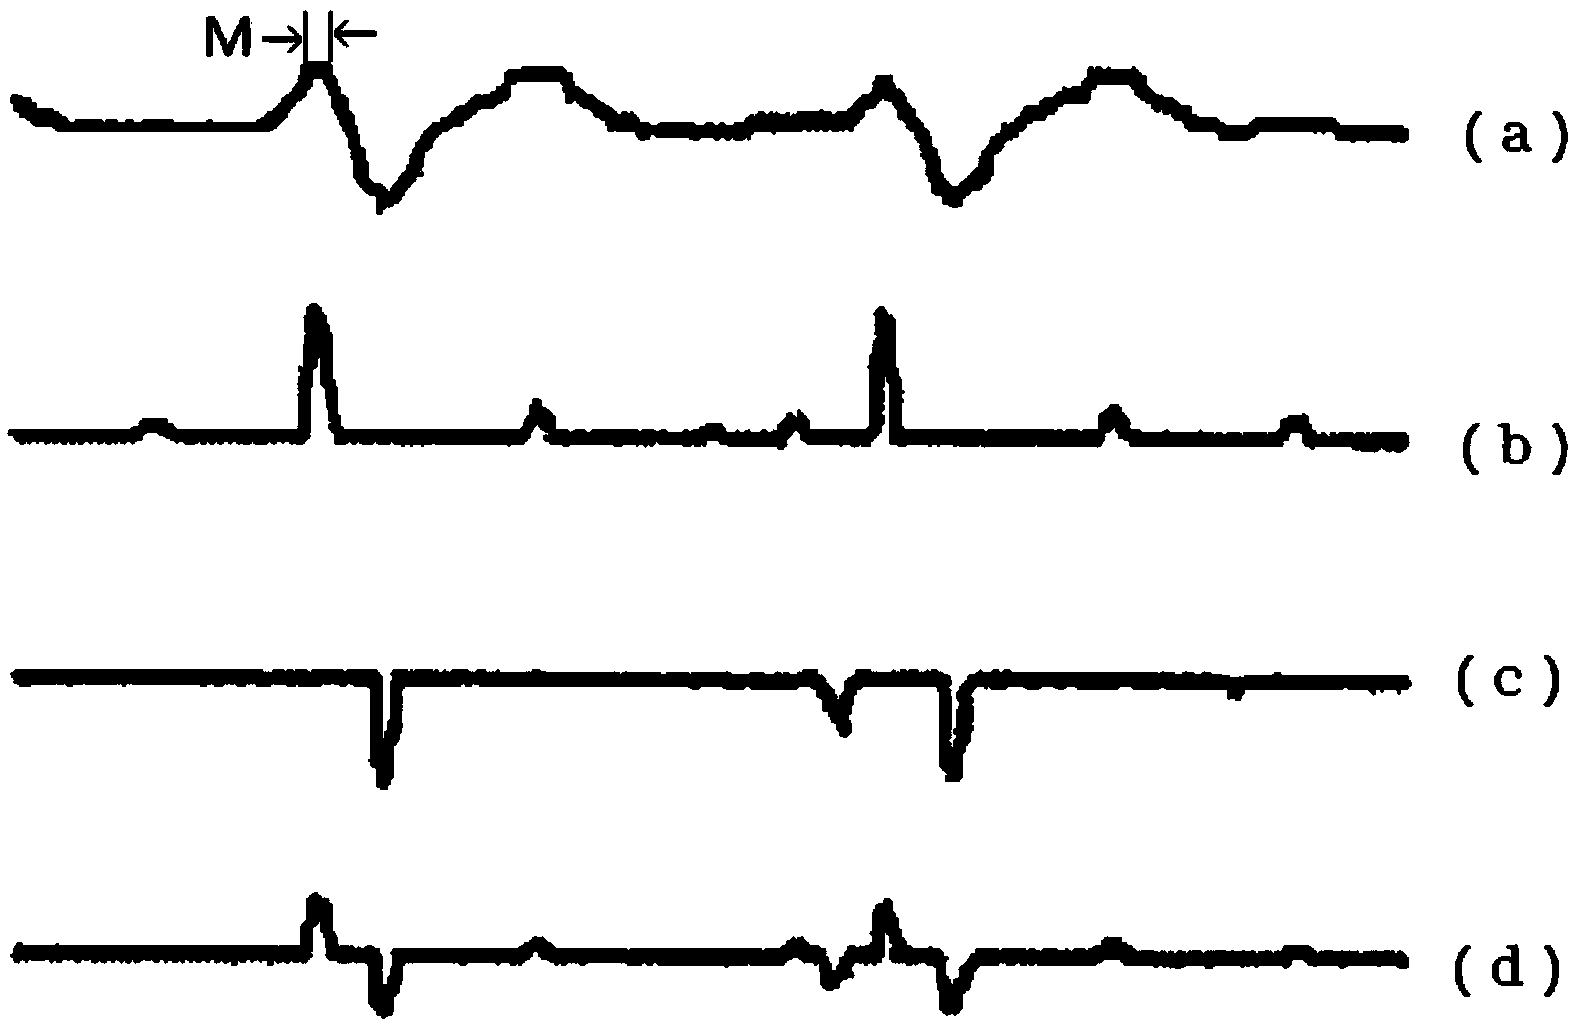 Method and device for detecting P-wave and T-wave in electrocardiogram (ECG) signal